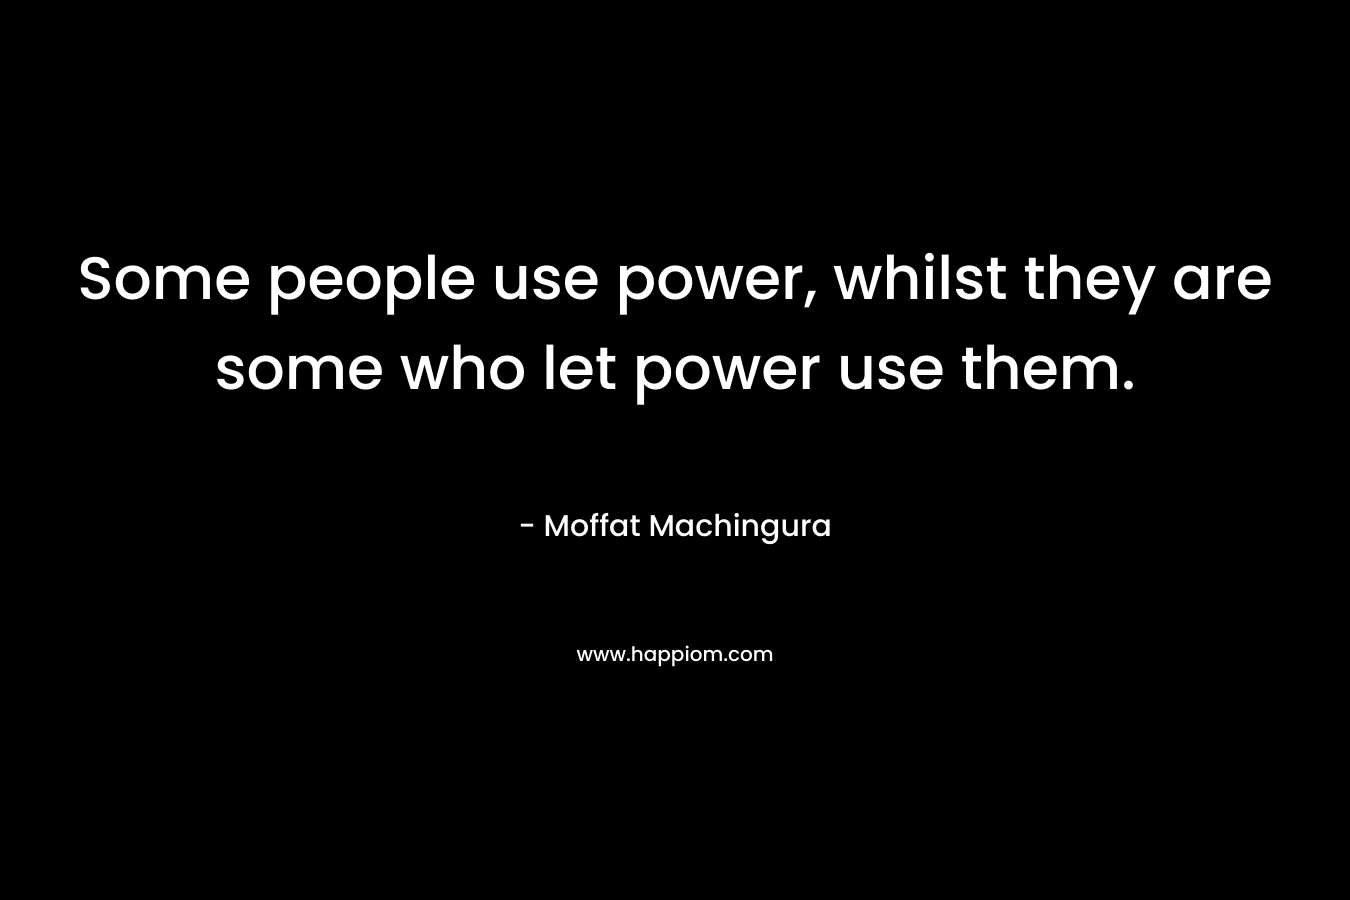 Some people use power, whilst they are some who let power use them. – Moffat Machingura